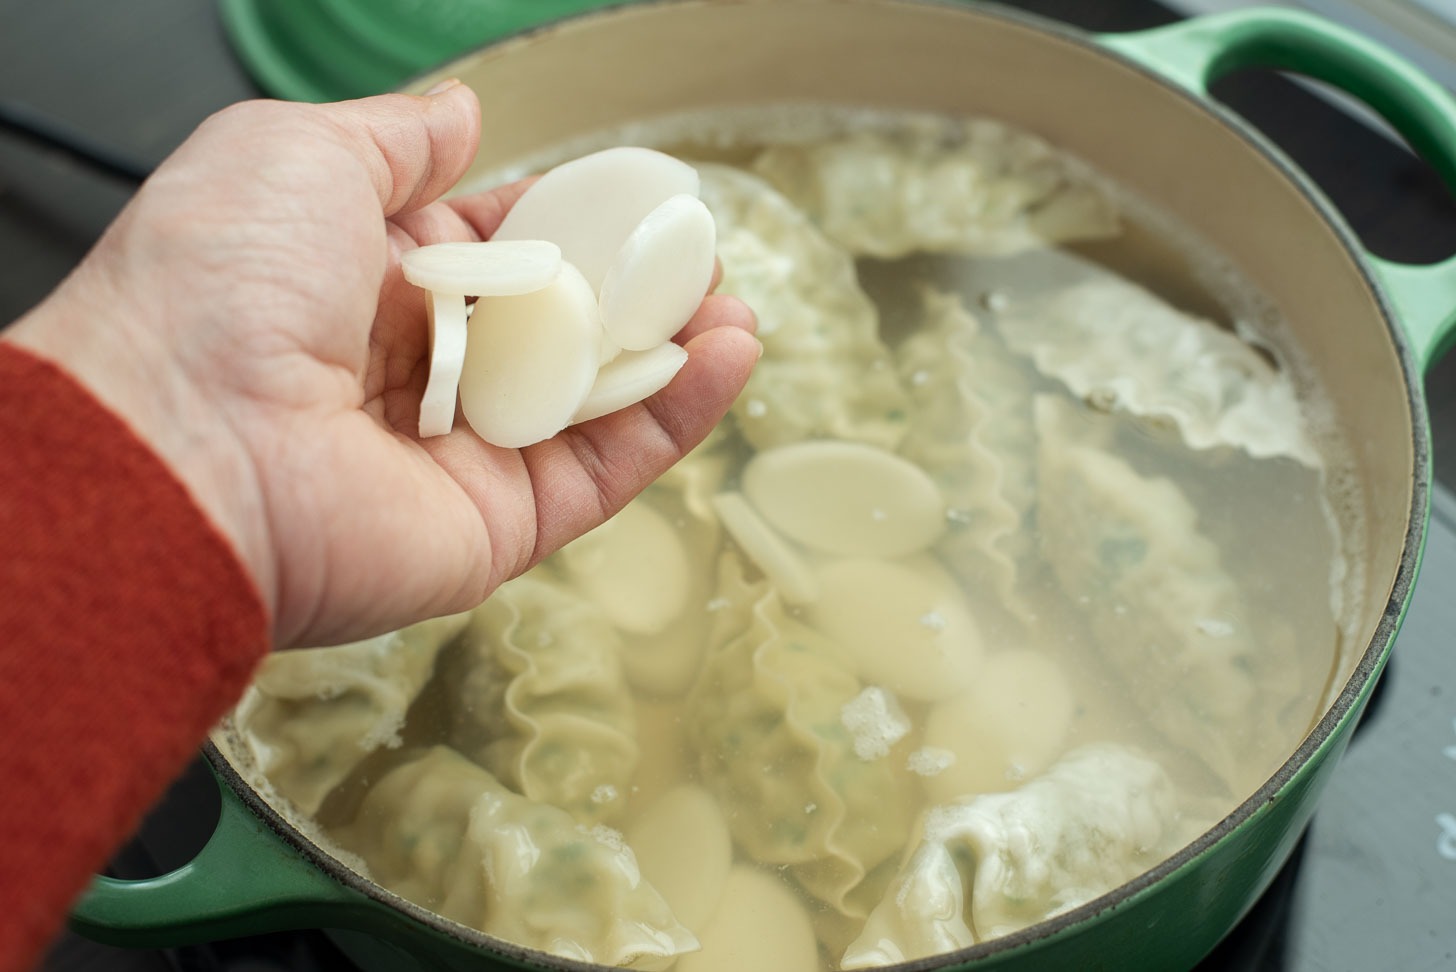 Frozen dumplings and rice cake rounds are added to the soup base in a pot.